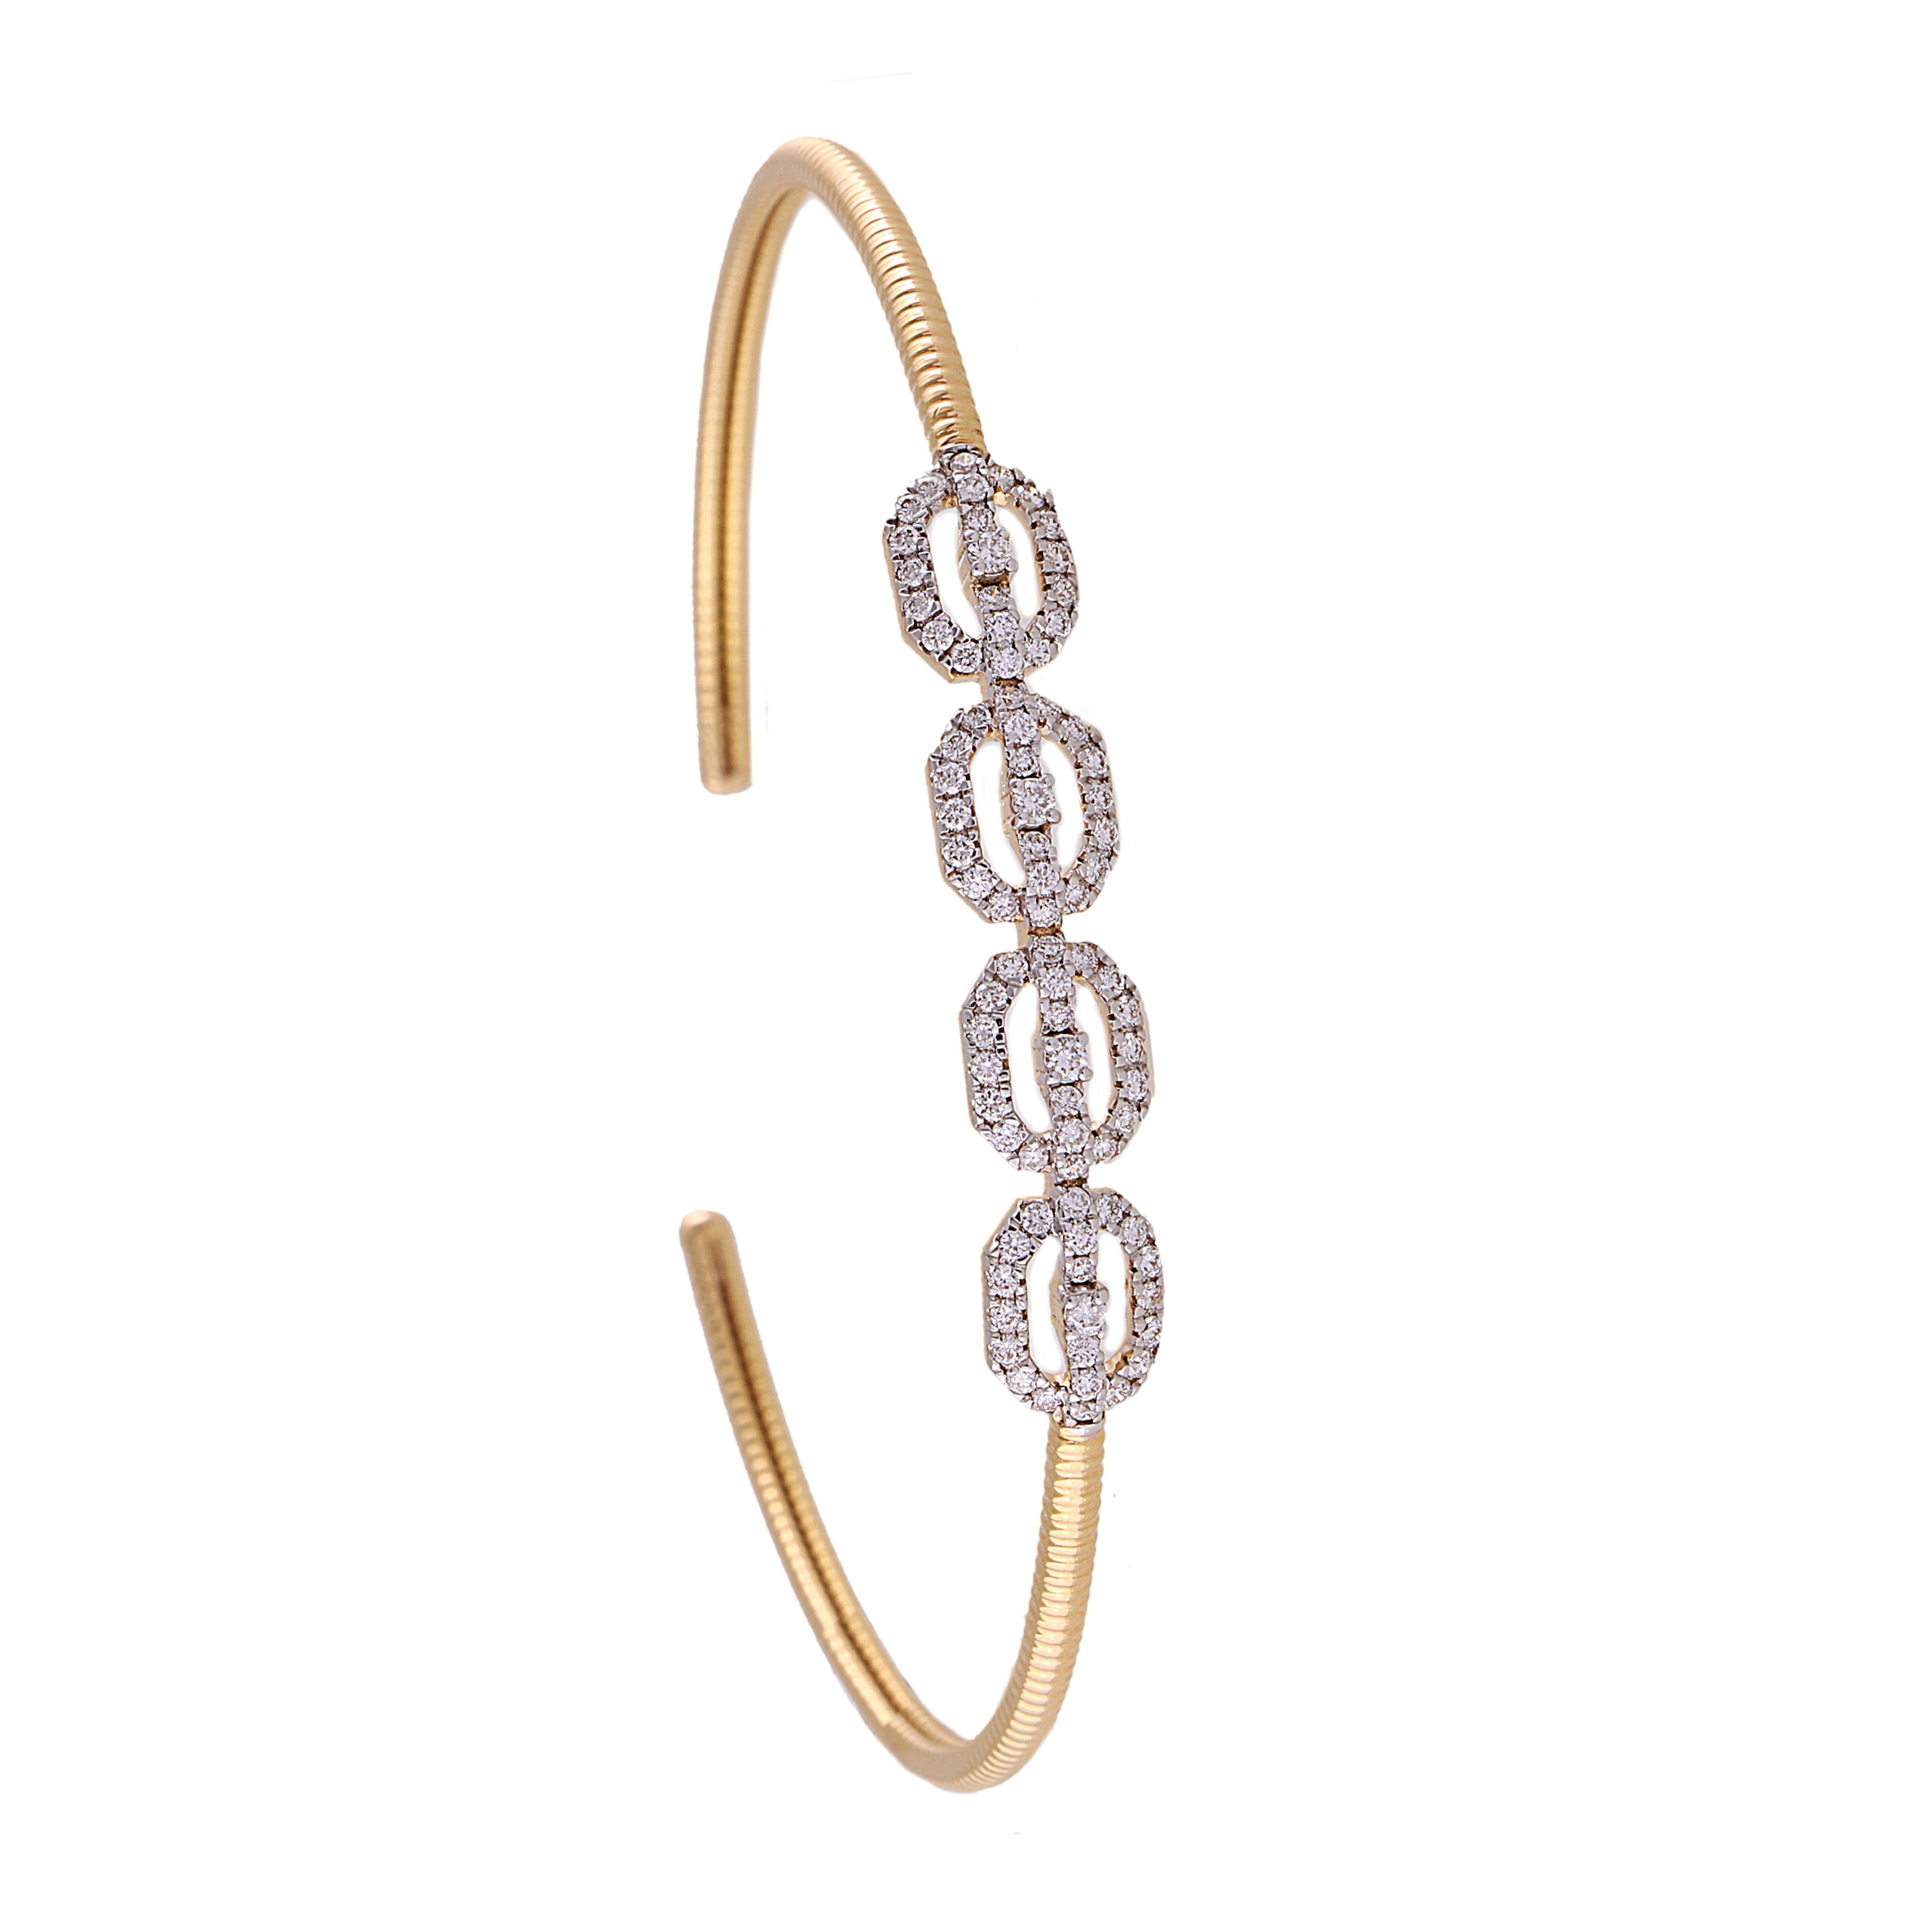 ORRA Diamond Jewellery - Mirror your inner glow with this dainty Diamond  Bracelet that is embedded with a floral cluster of diamonds. Grace and  elegance is now at your fingertips. Shop now